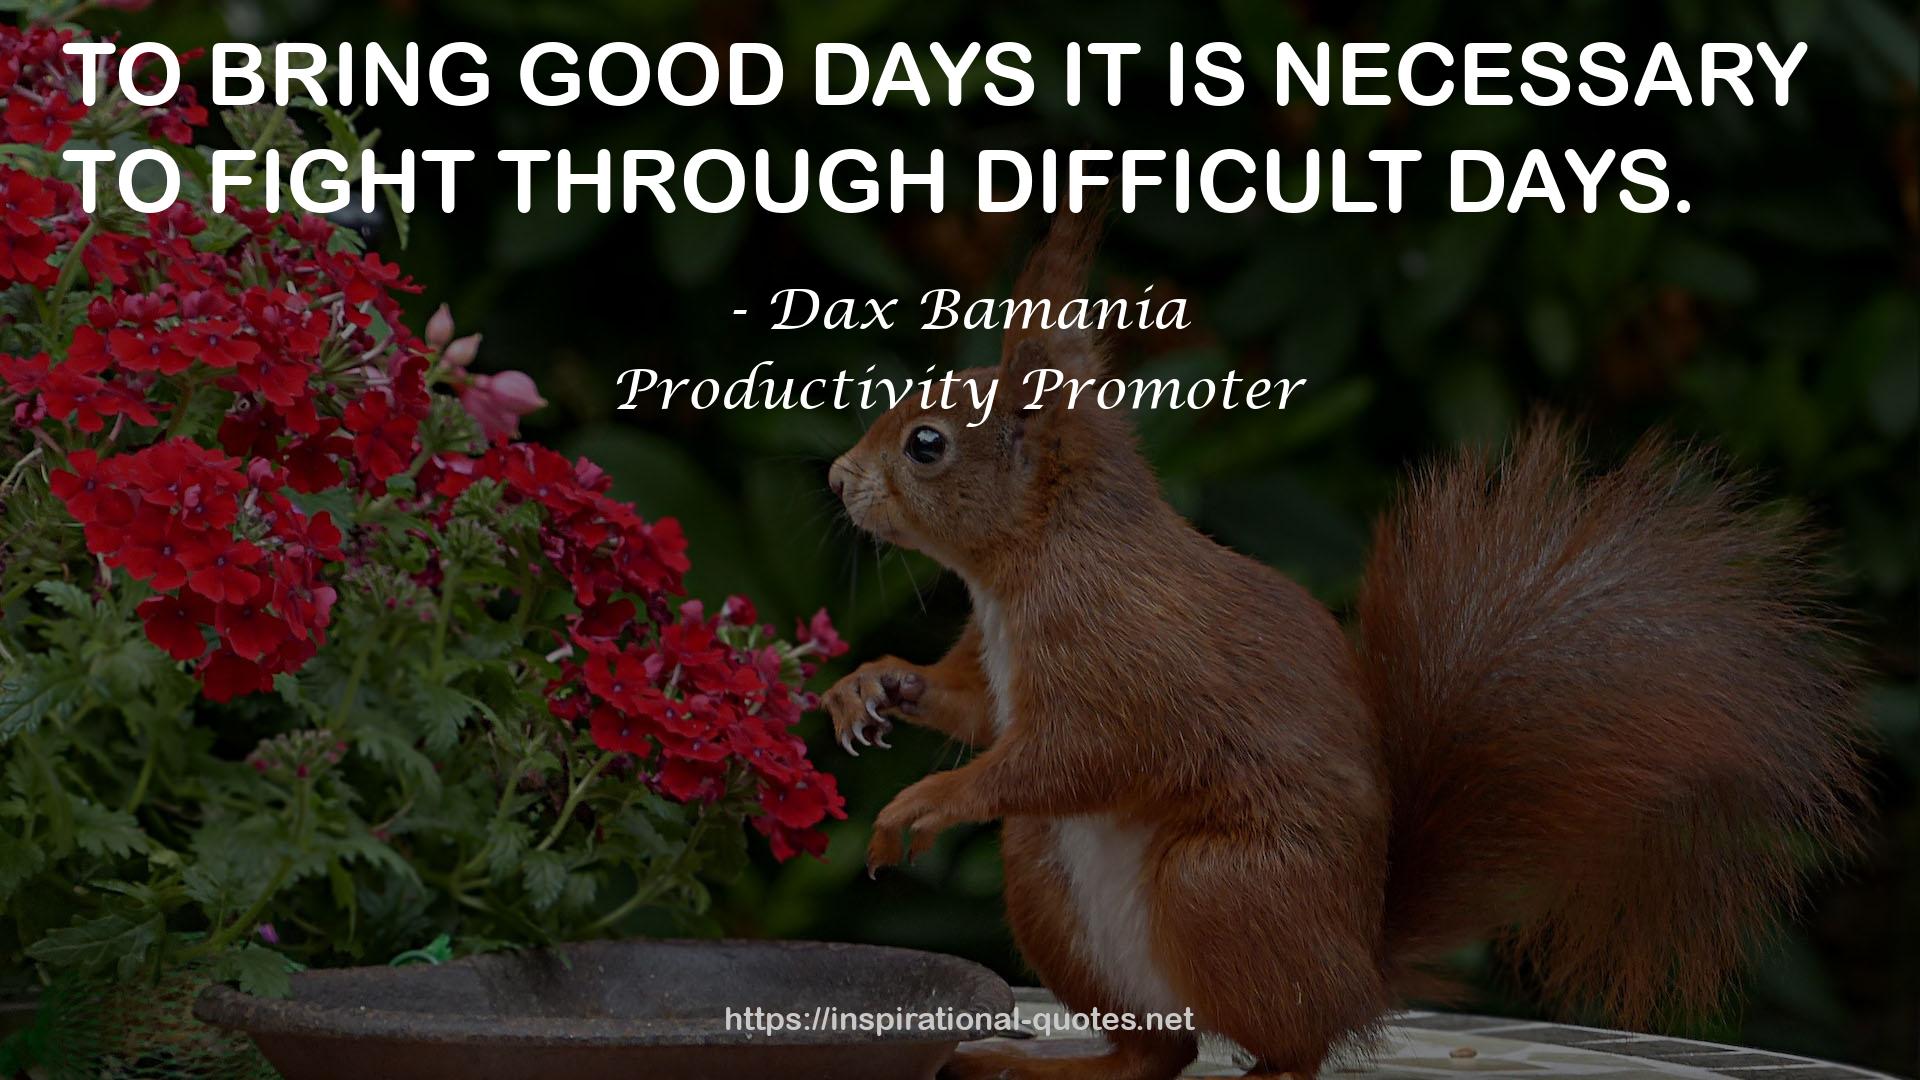 Productivity Promoter QUOTES